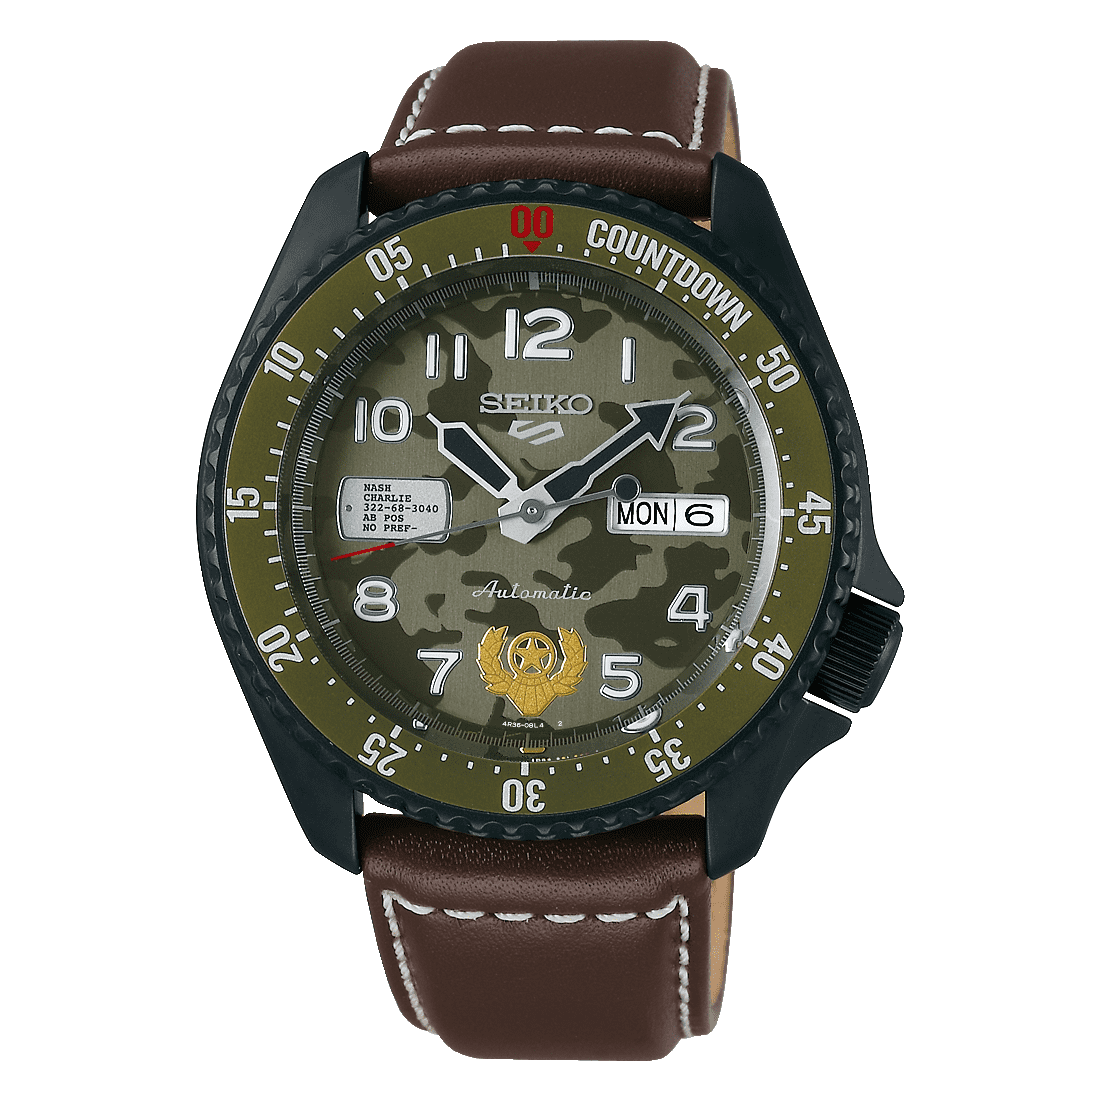 Seiko 5 Sport - Street Fighter Guile Limited Edition SRPF21K1 Seiko